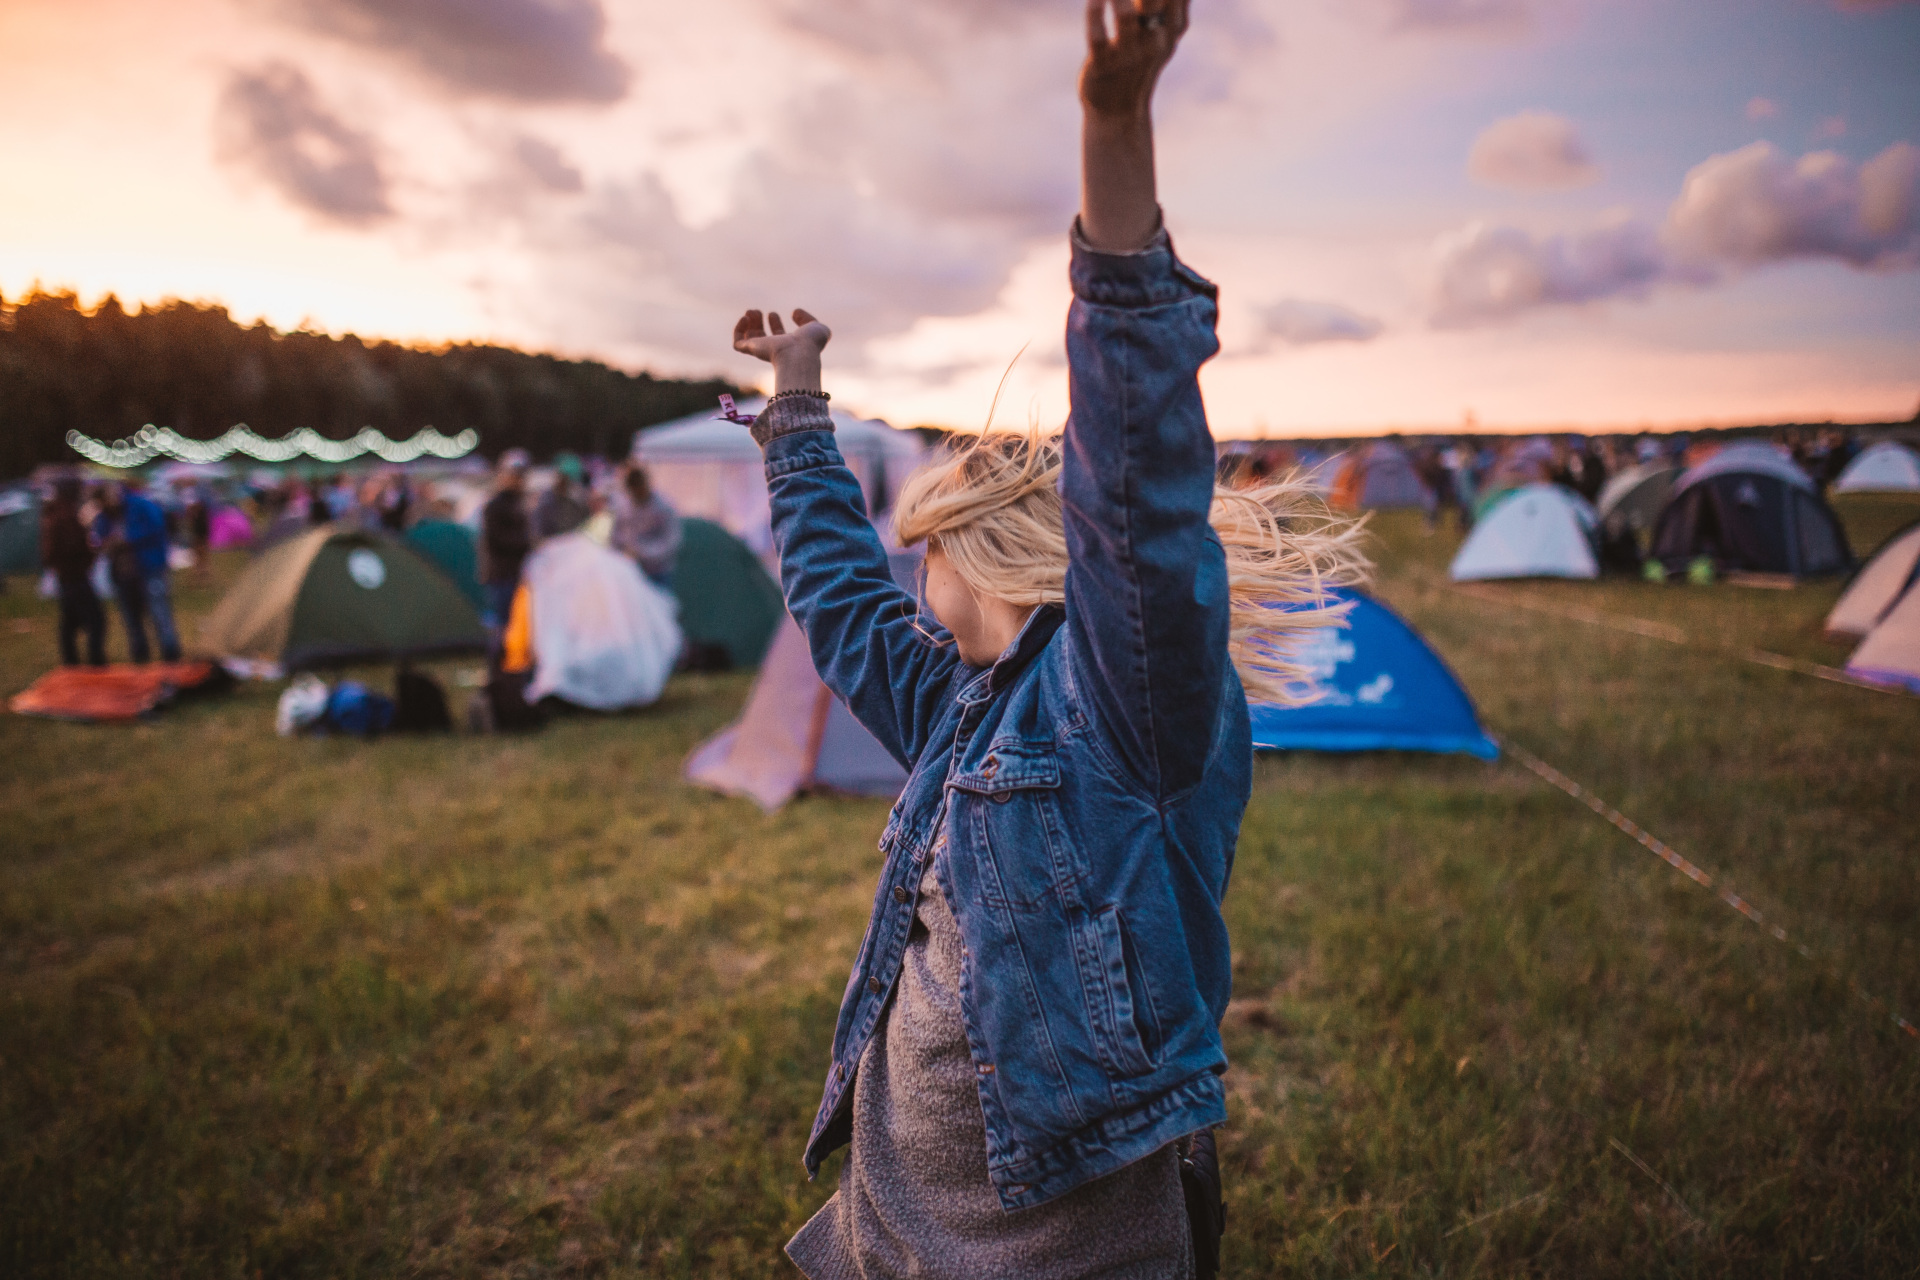 Woman dancing in front of festival tents